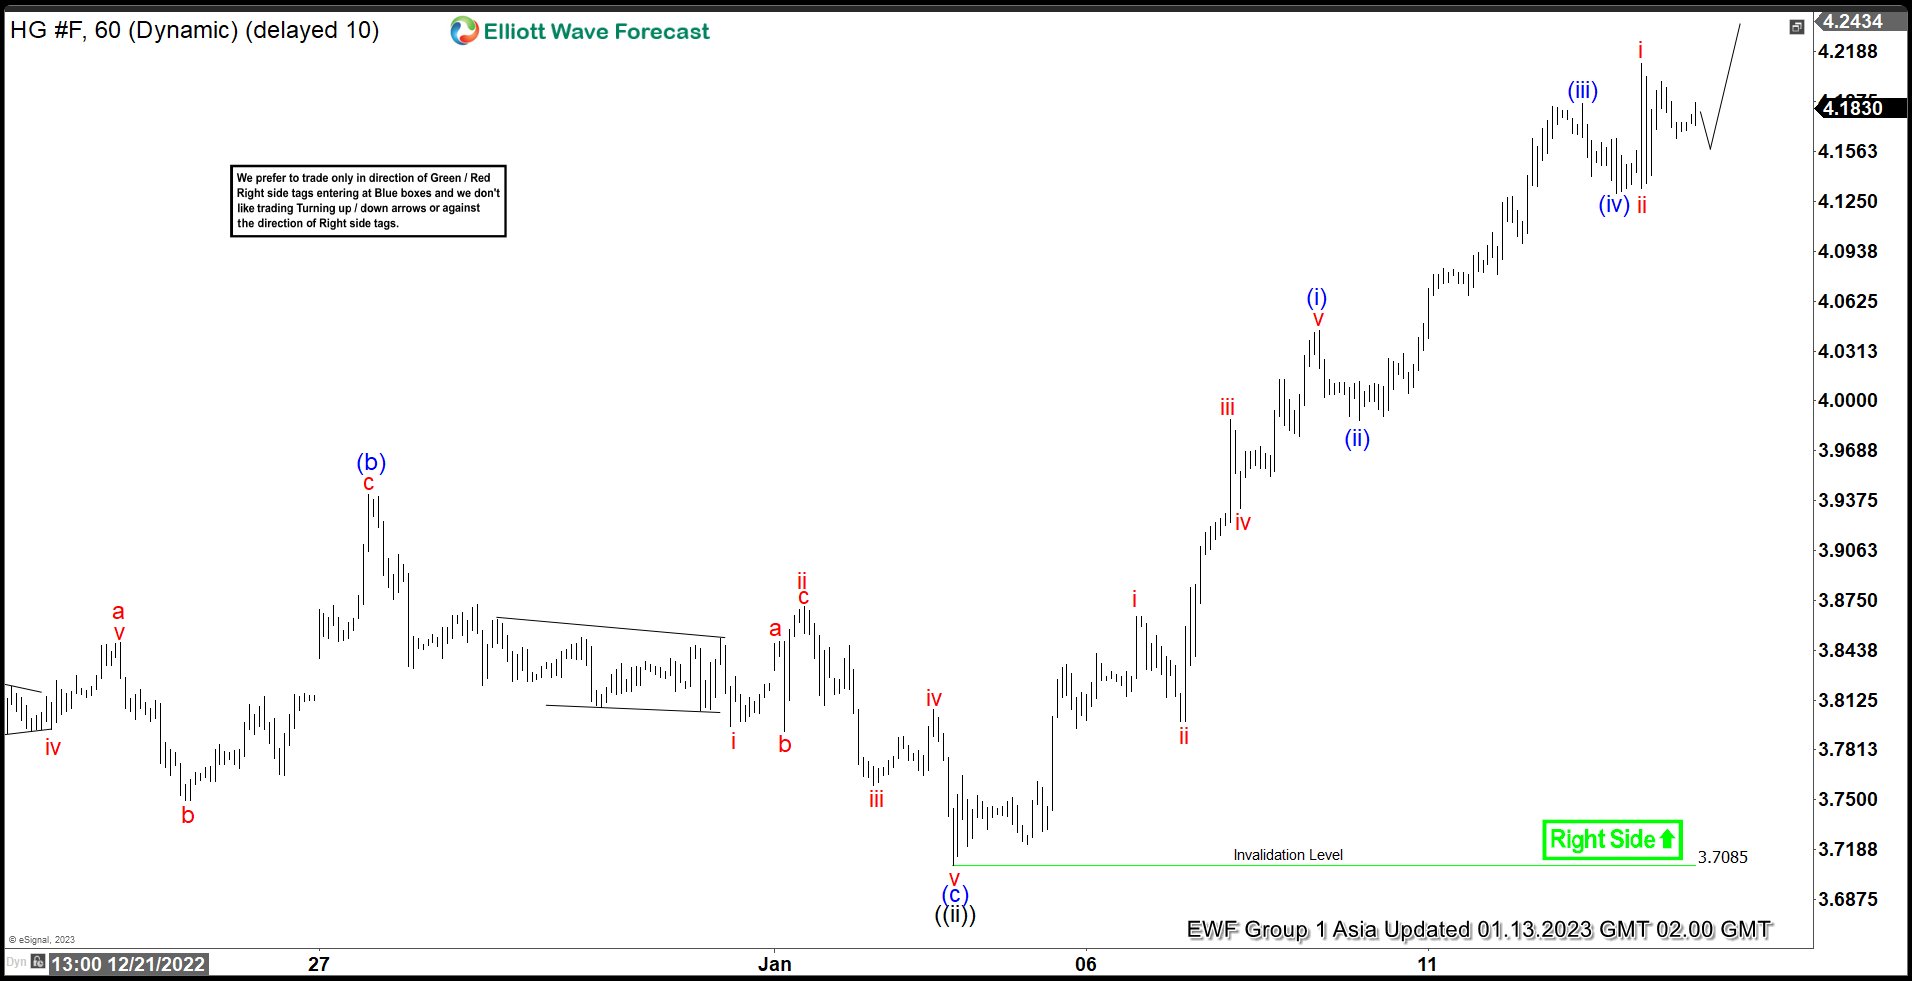 Copper (HG) Rallies in a Nesting Impulse According to Elliott Wave